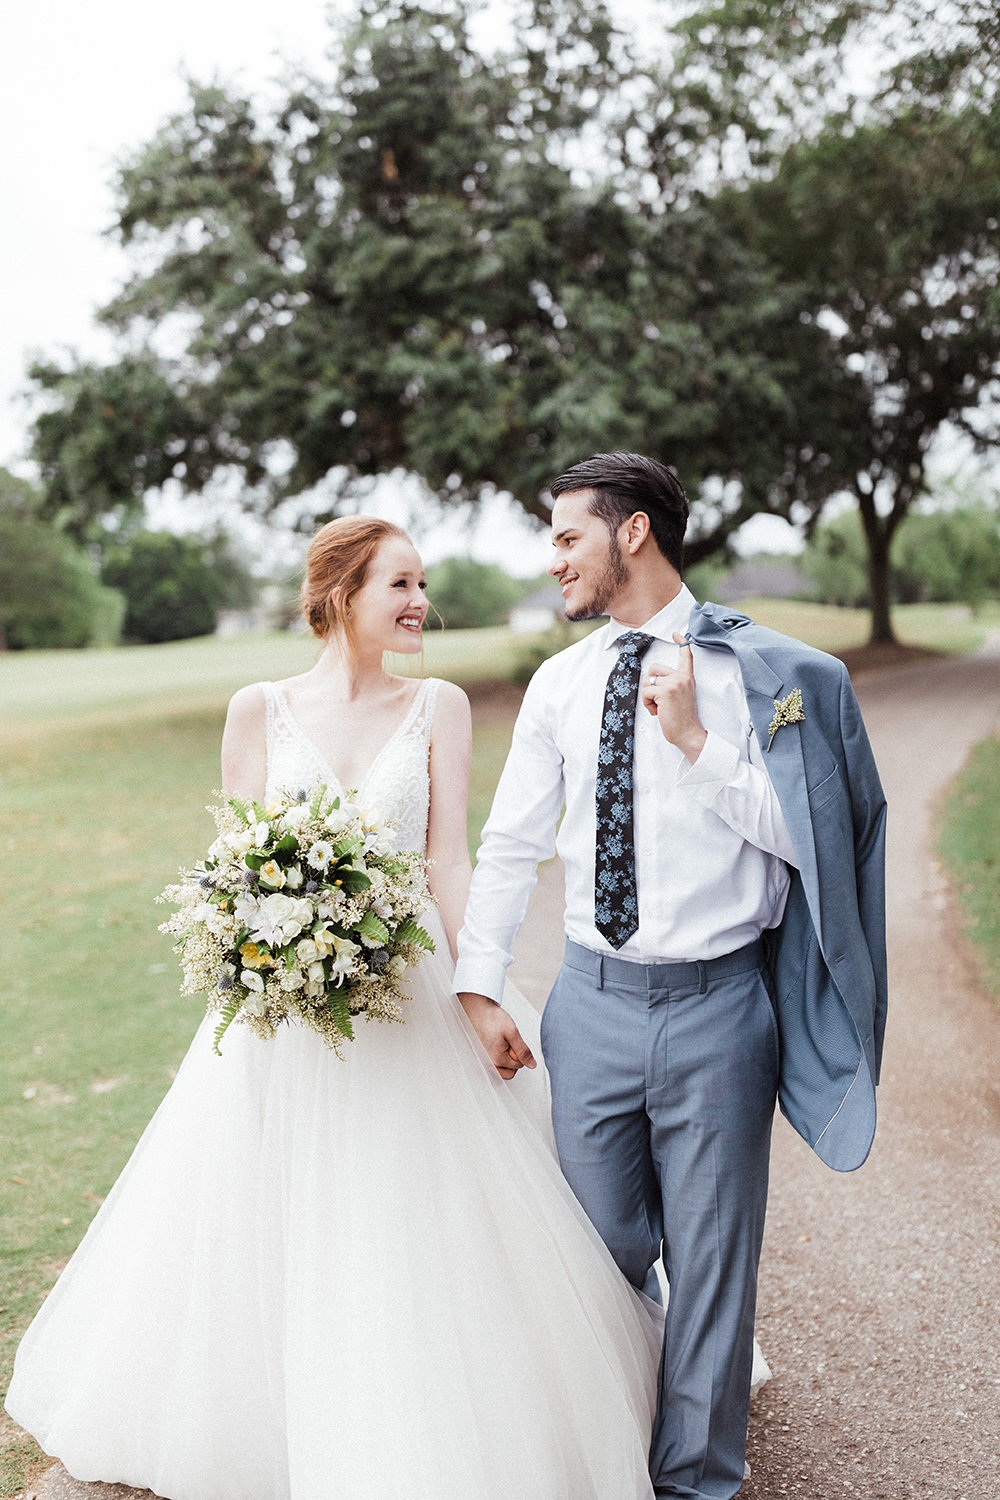 Groom in Blue Floral Tie & Linen Suit | photo by Ash Simmons Photography | featured on I Do Y'all